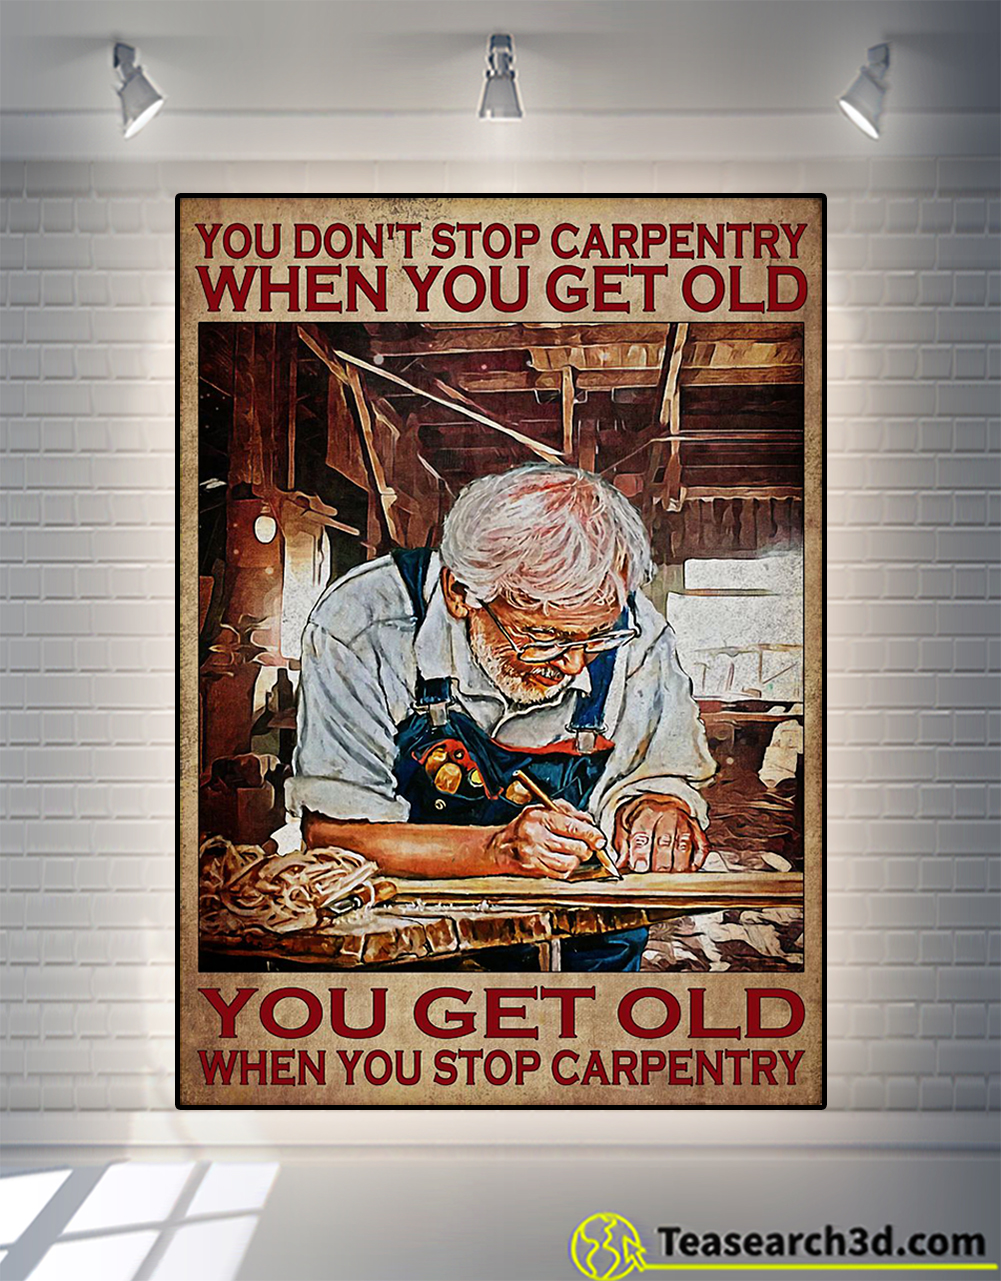 You don't stop carpentry when you get old poster